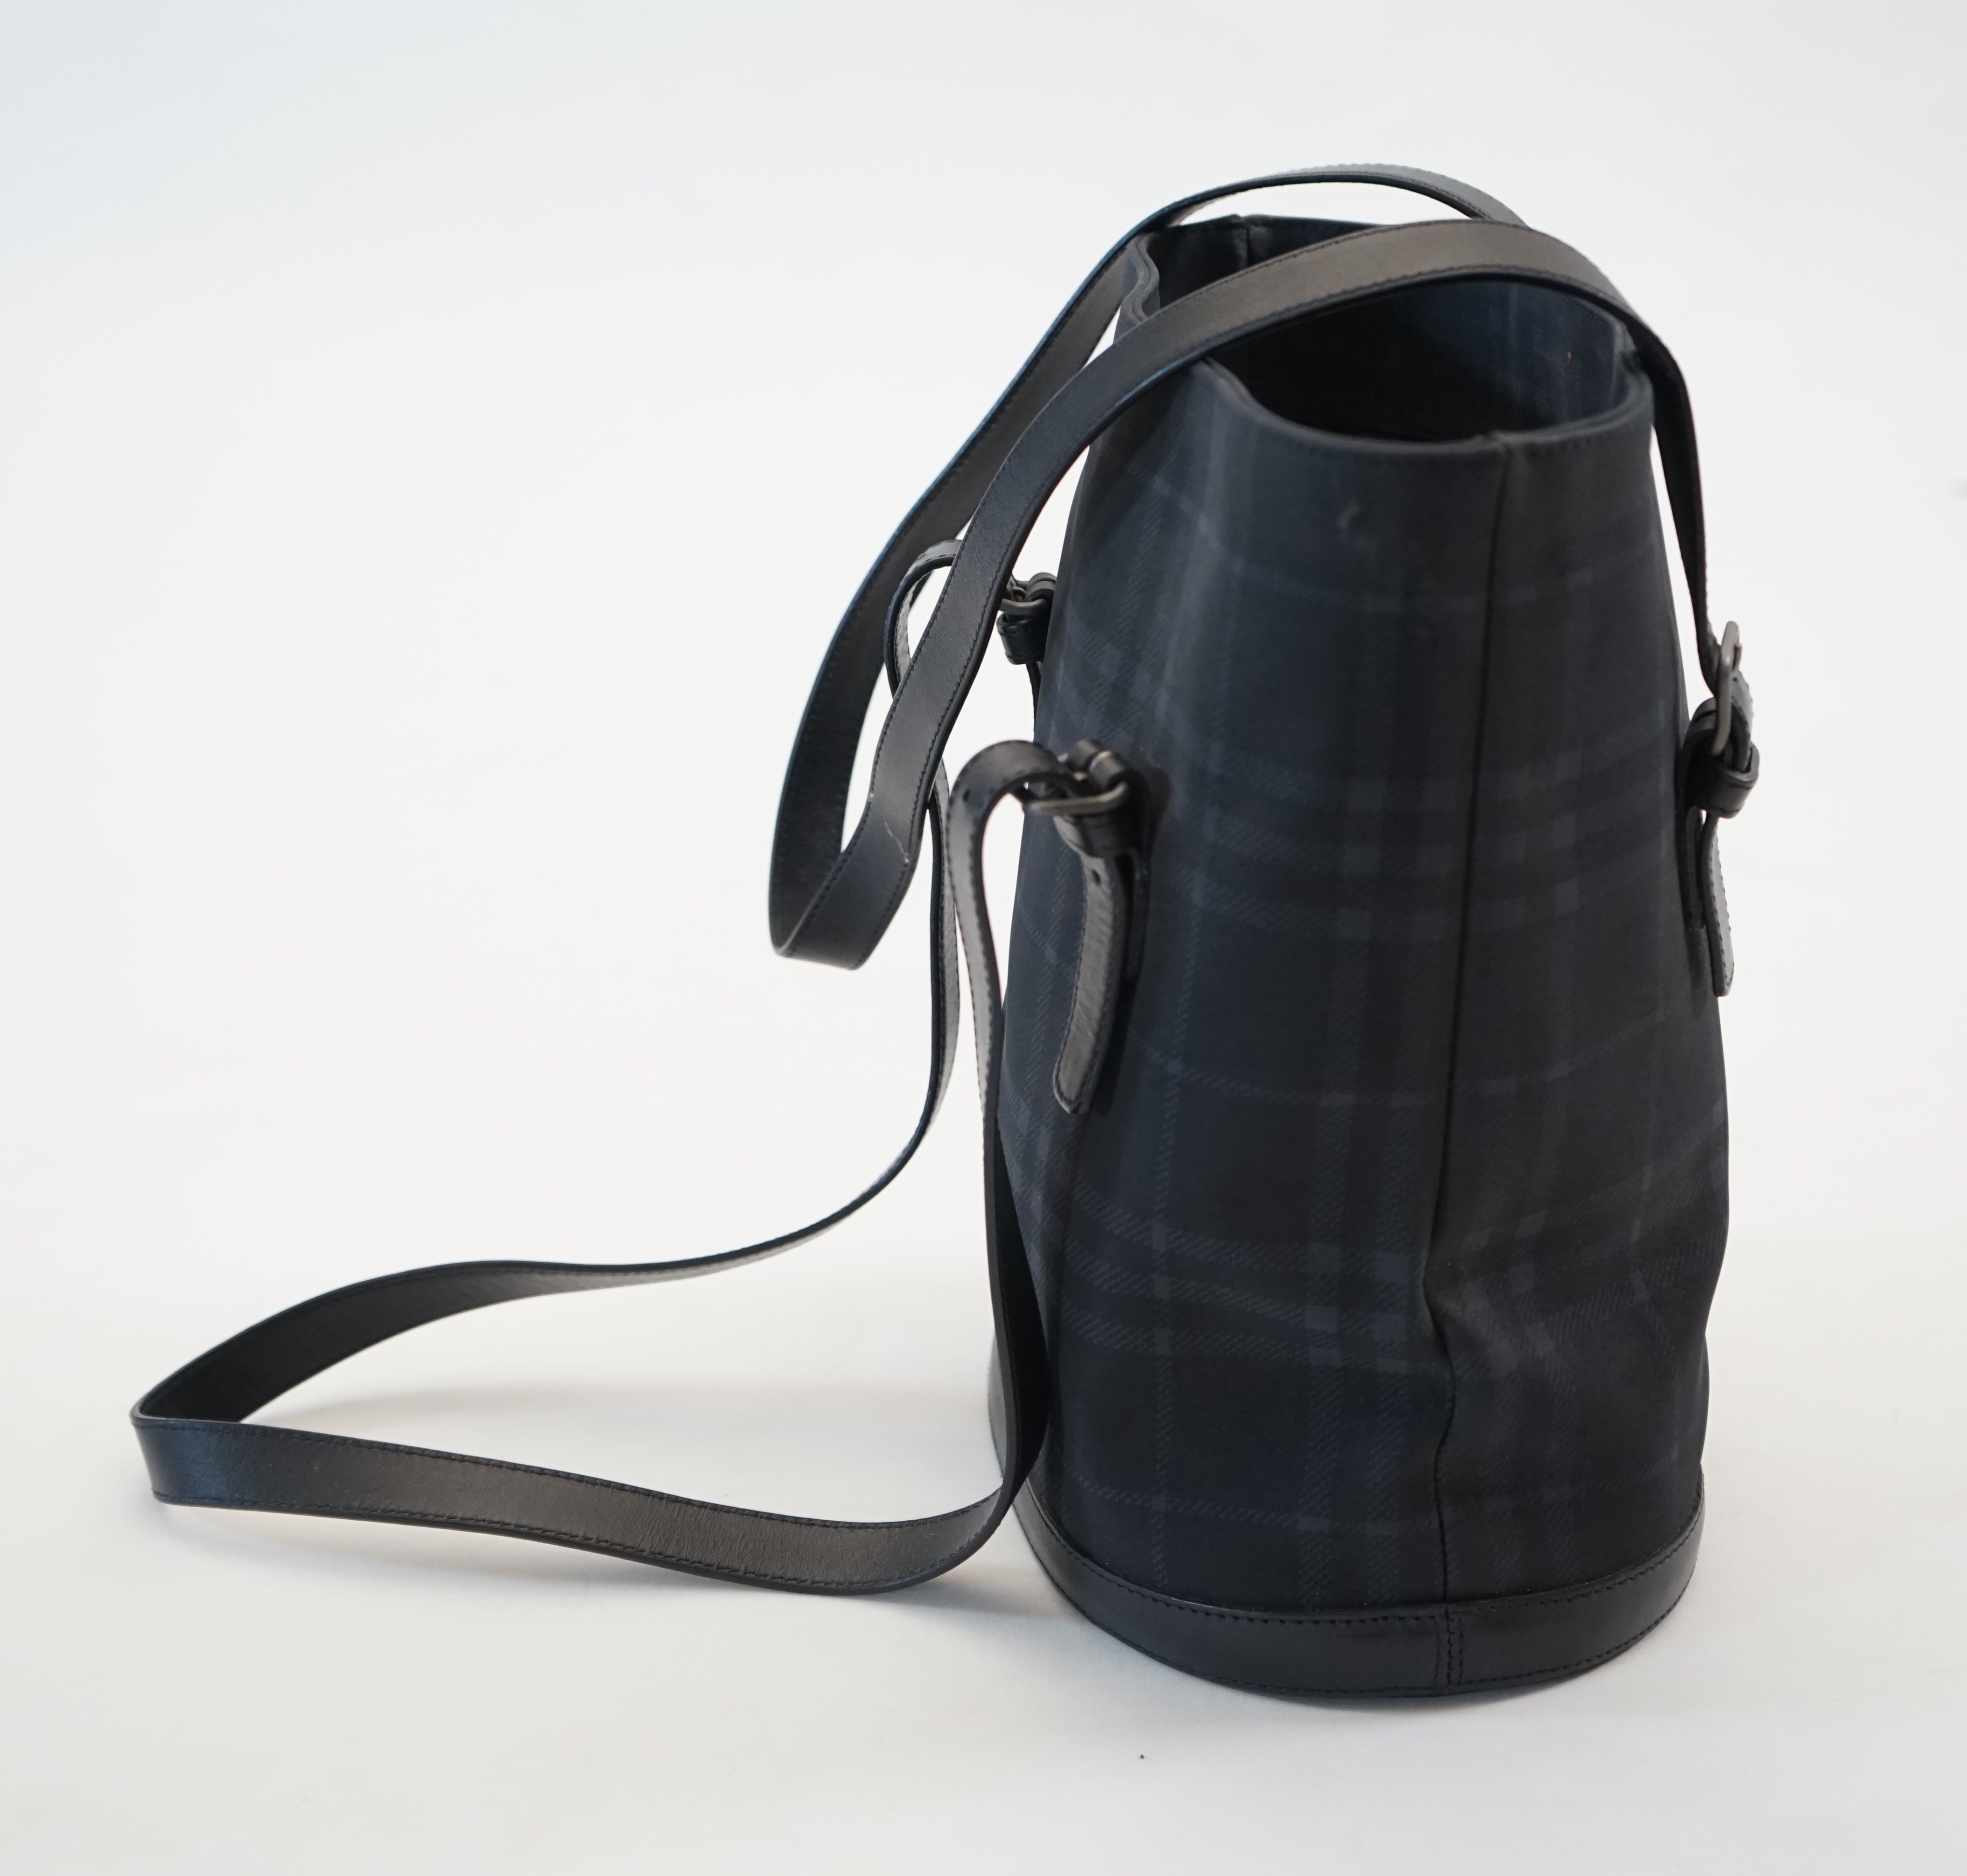 A Burberry bucket bag in blue black tartan canvas and leather, width 26cm, depth 16cm, height 27cm